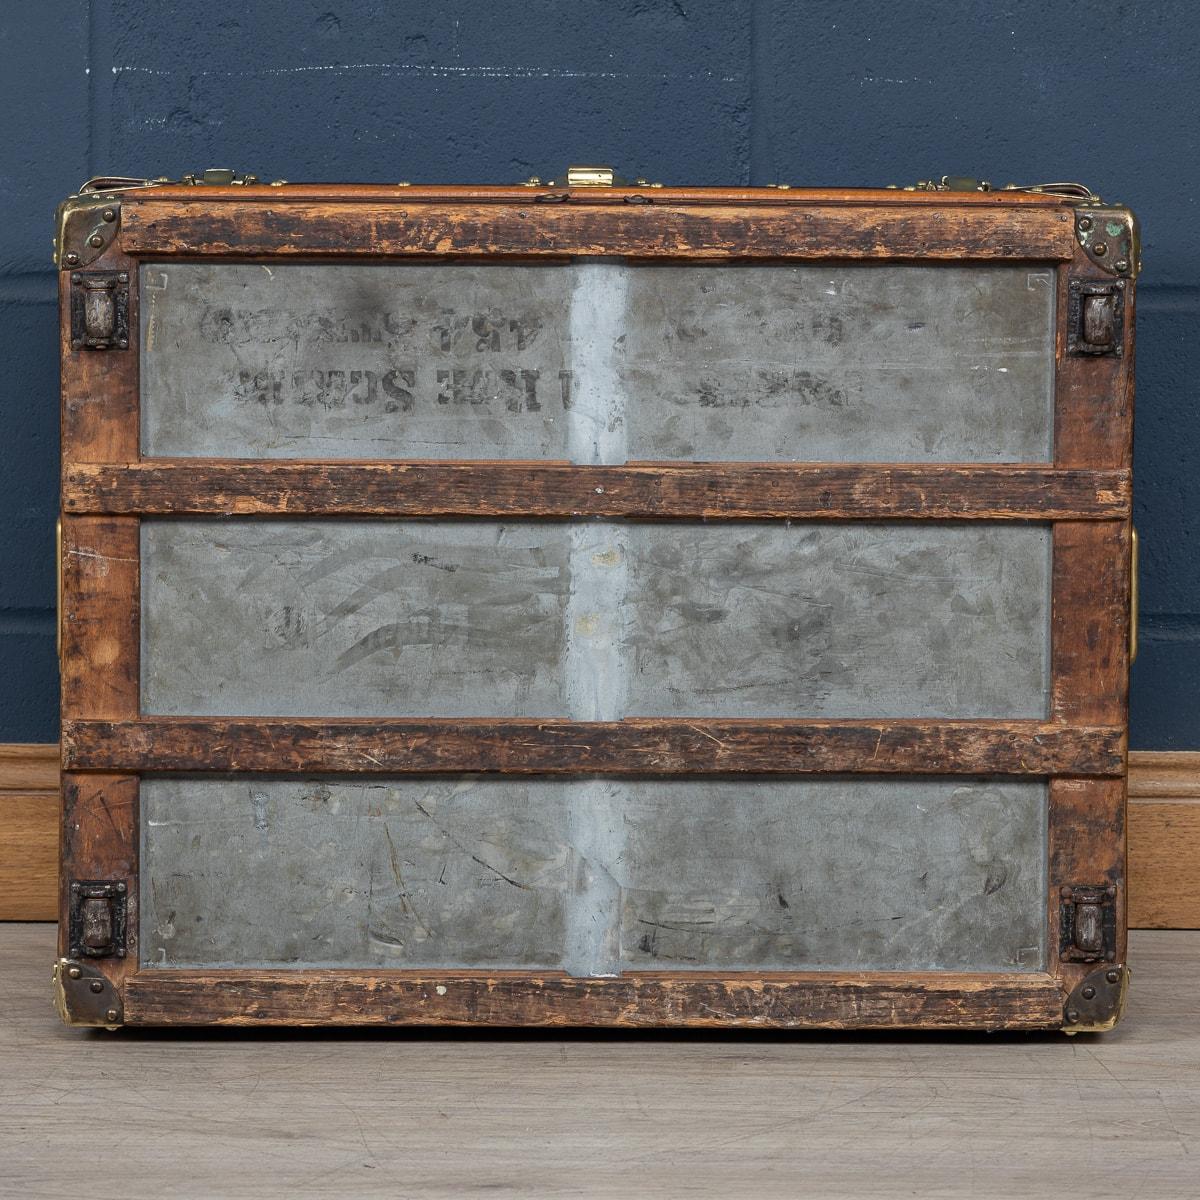 Late 19th Century Rare 19th Century Louis Vuitton Shirt Trunk In Damier Canvas, France c.1895